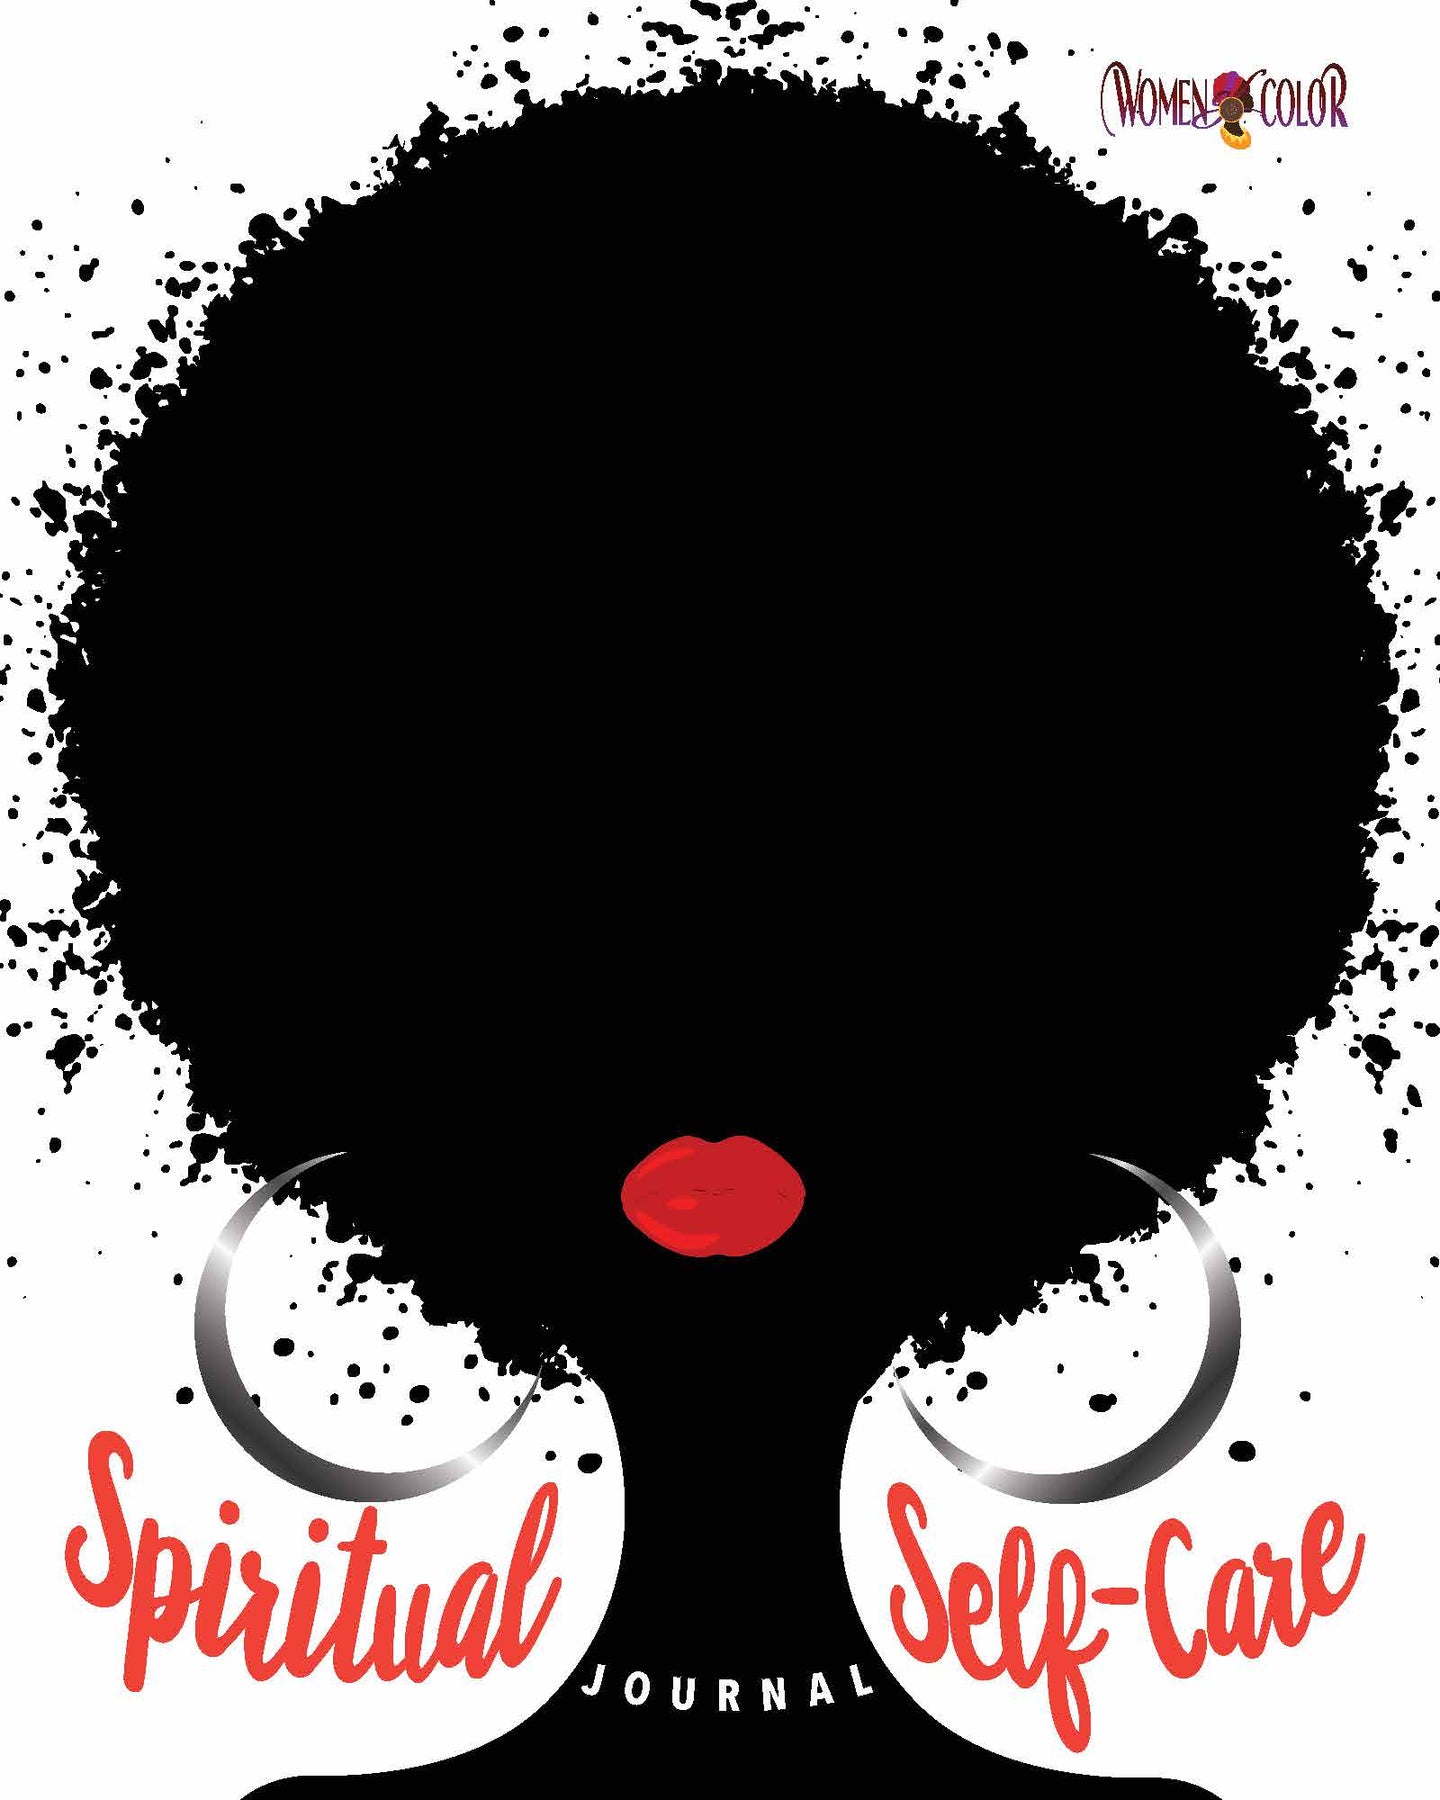 Women of Color Spiritual Self-Care Journal - Black Edition with lay-flat binding